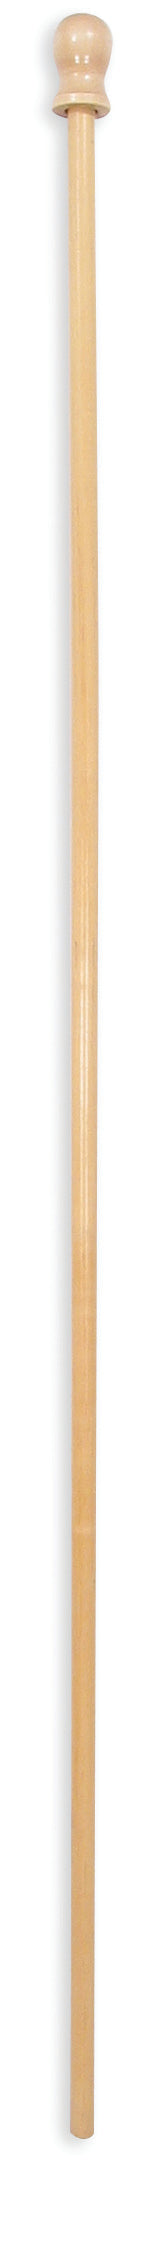 5'x1" Wood Pole with Wooden Ball Ornament